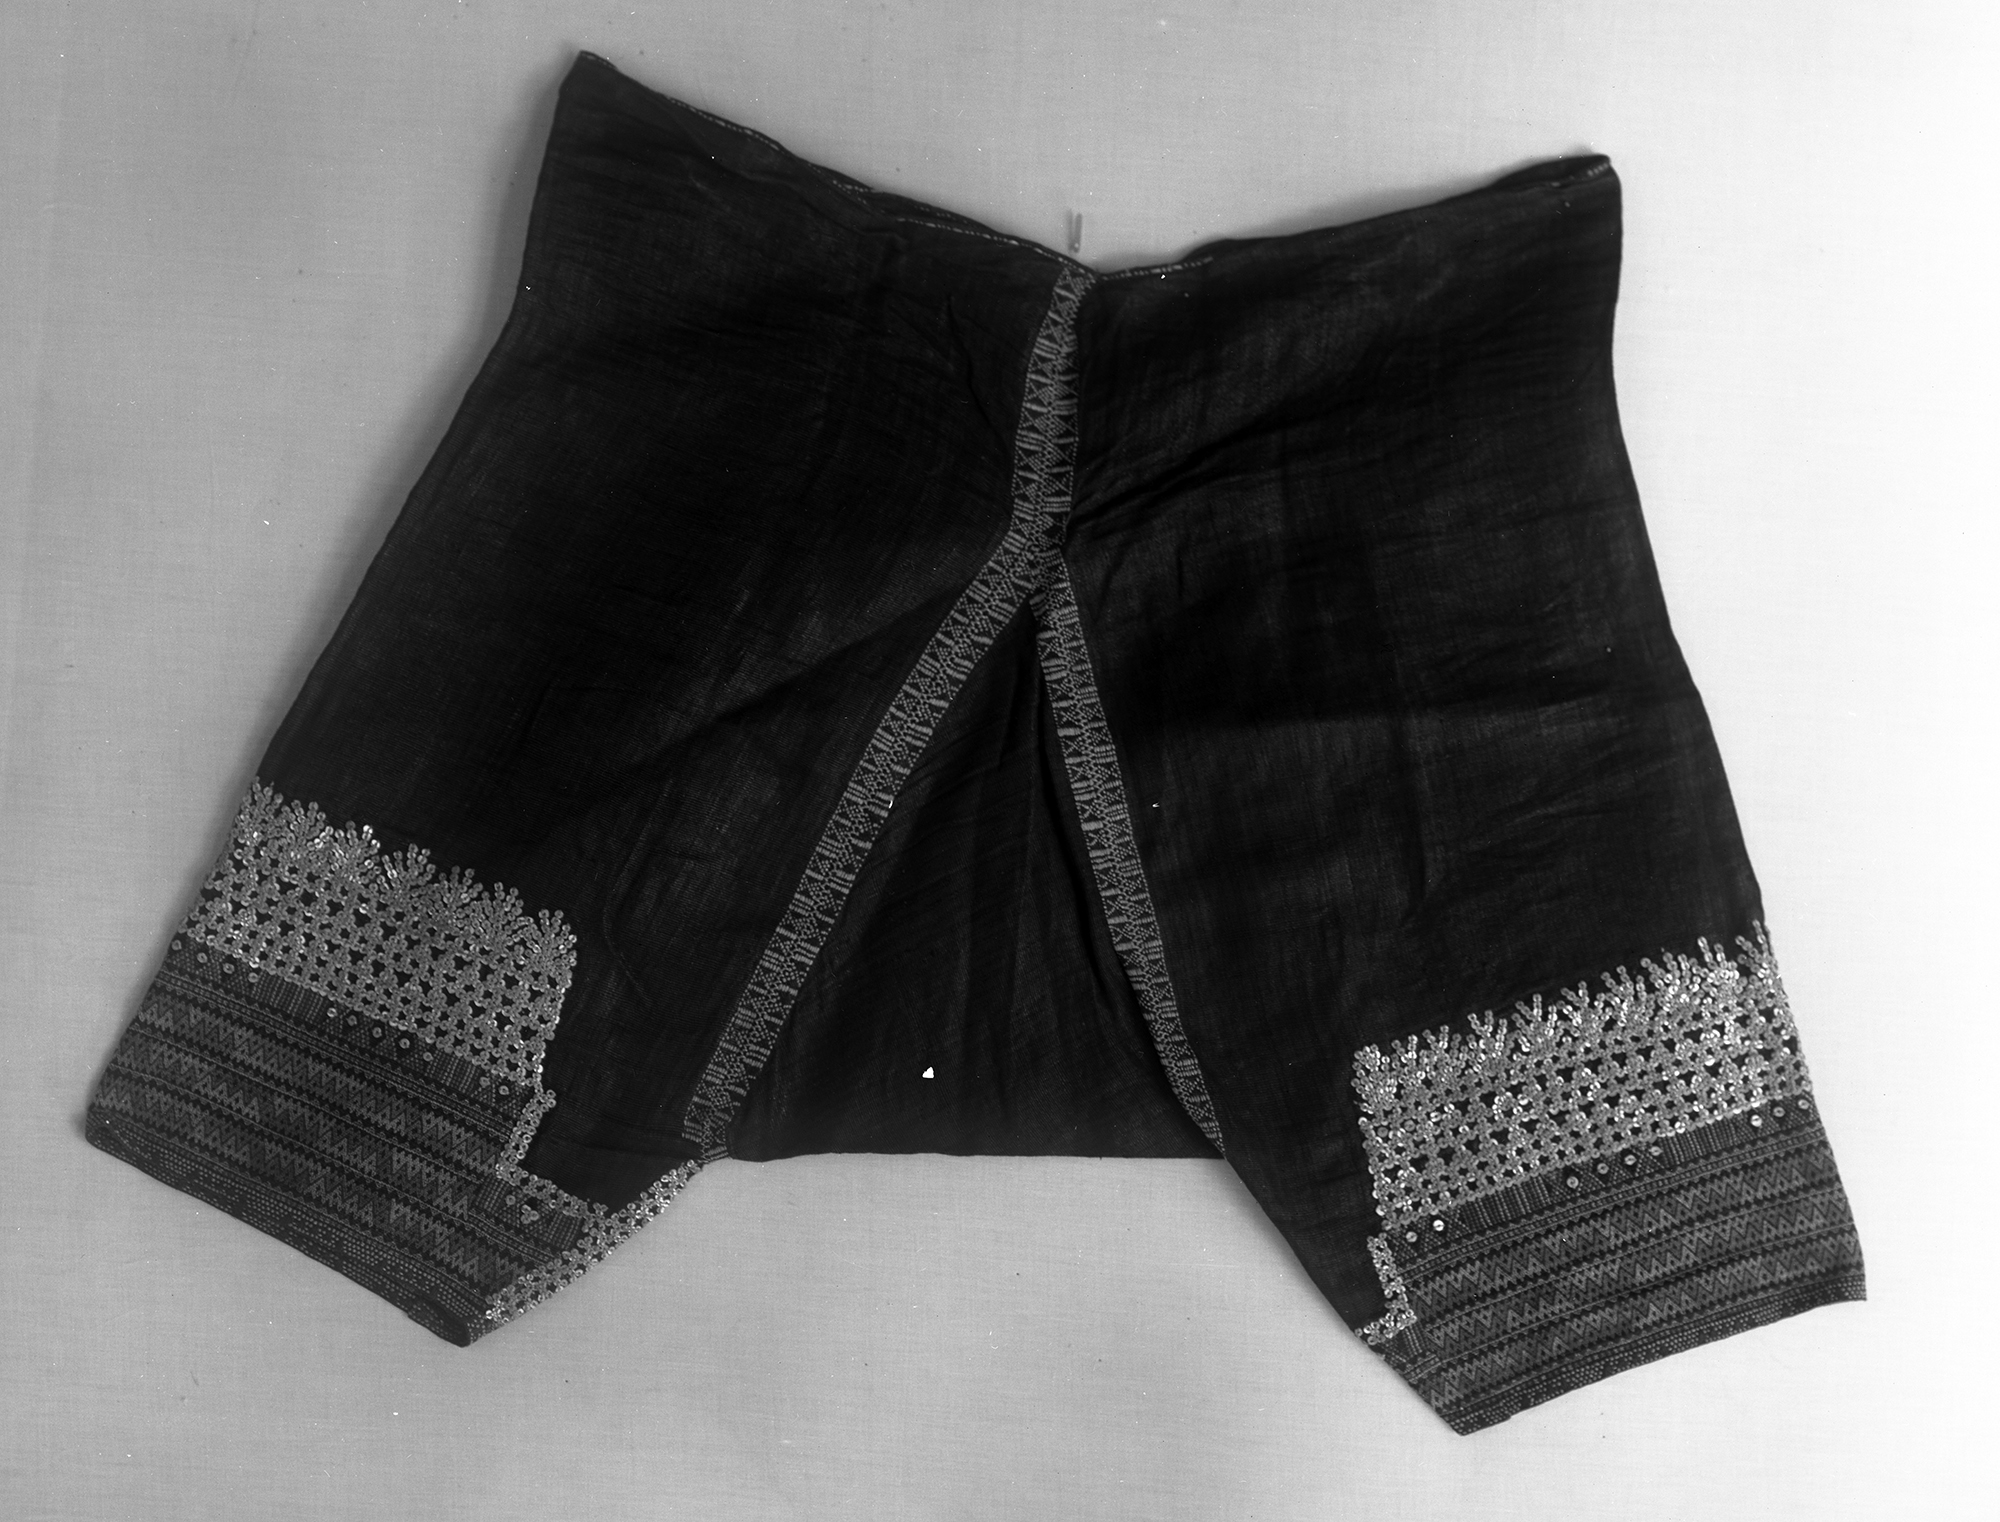 Men's trousers decorated with embroidery and shell disks.  Specimens. hemp, shells, embroidery 